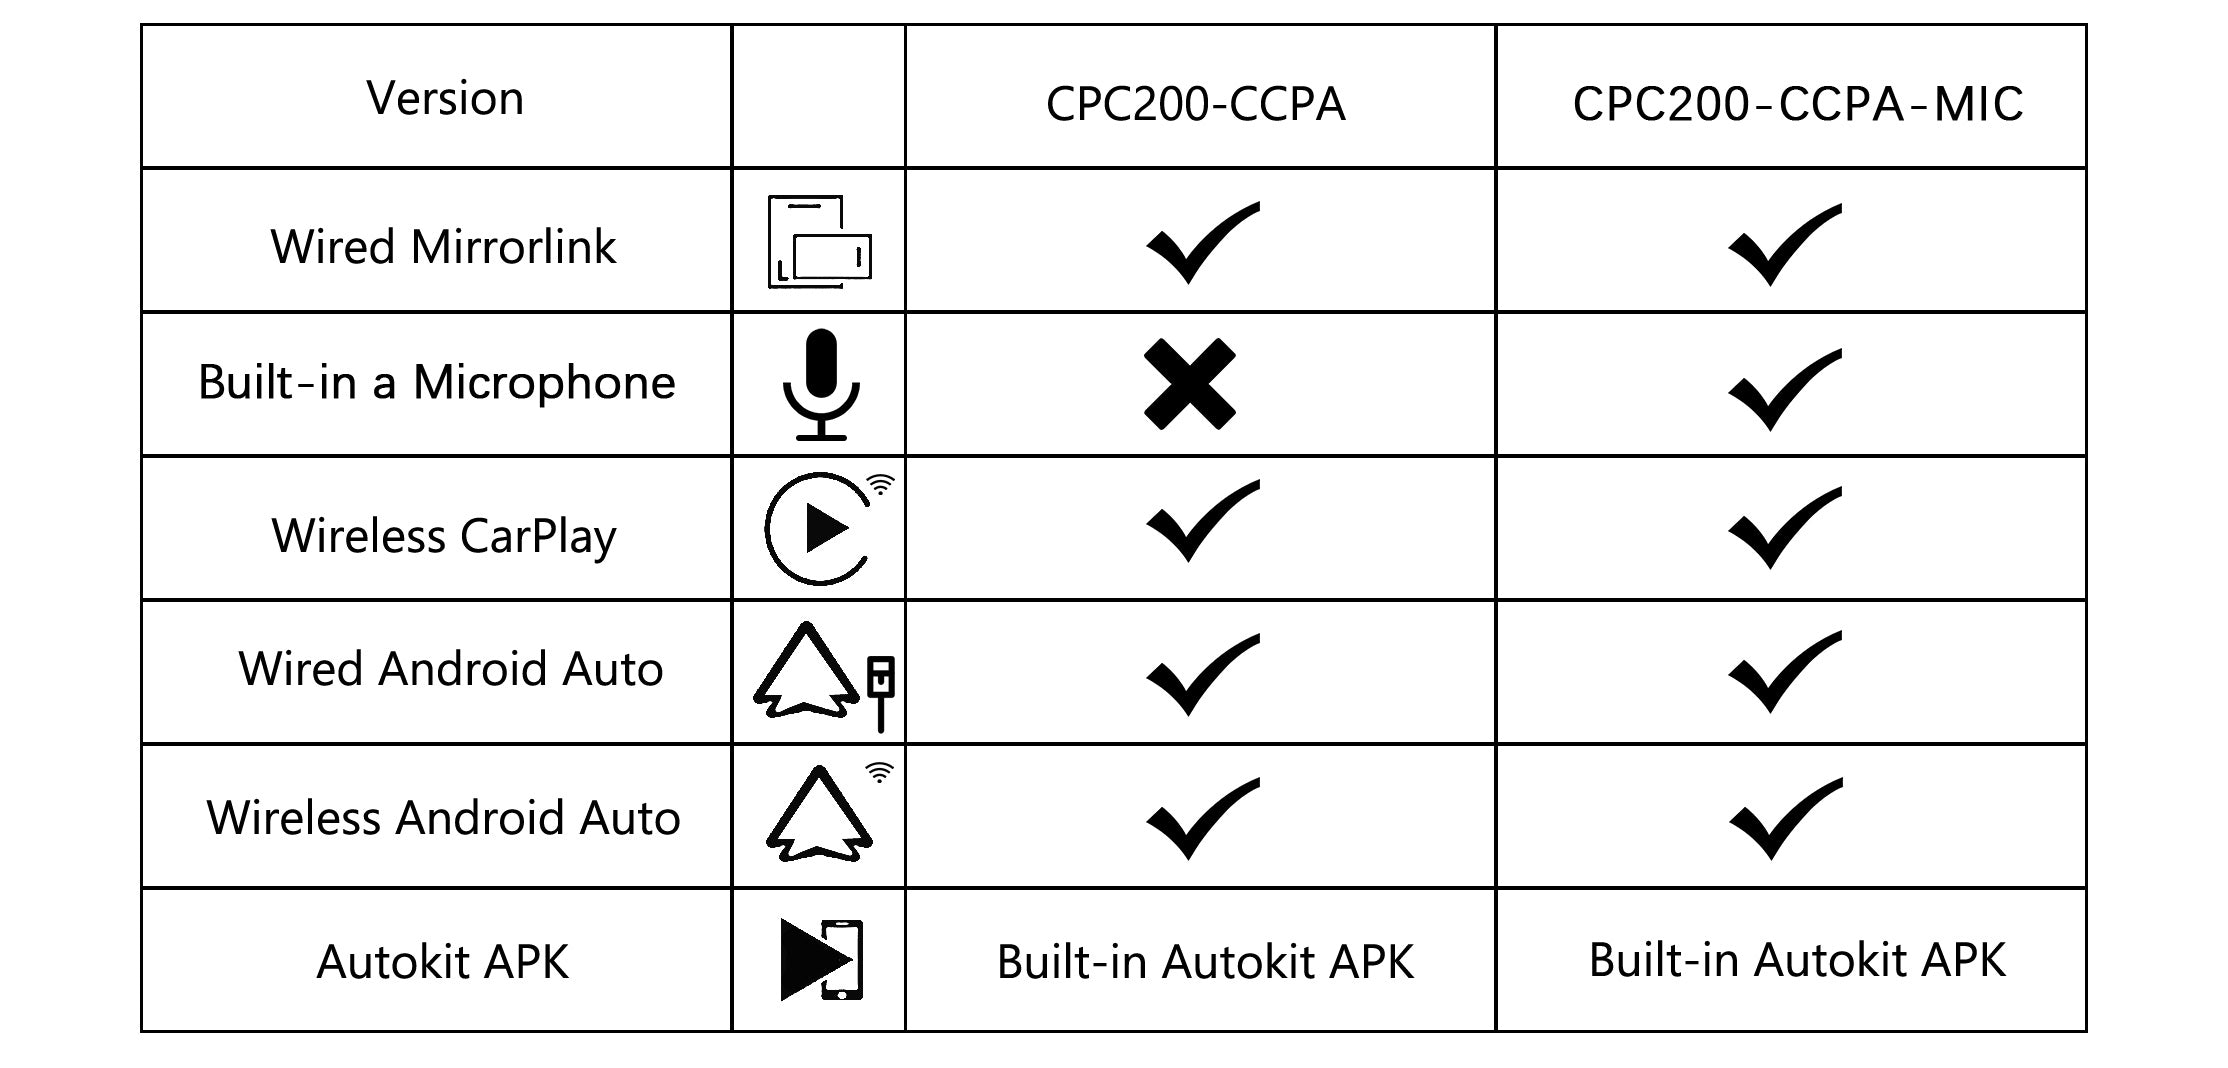 Comparison of features between CPC200-CCPA and CPC200-CCPA-Mic